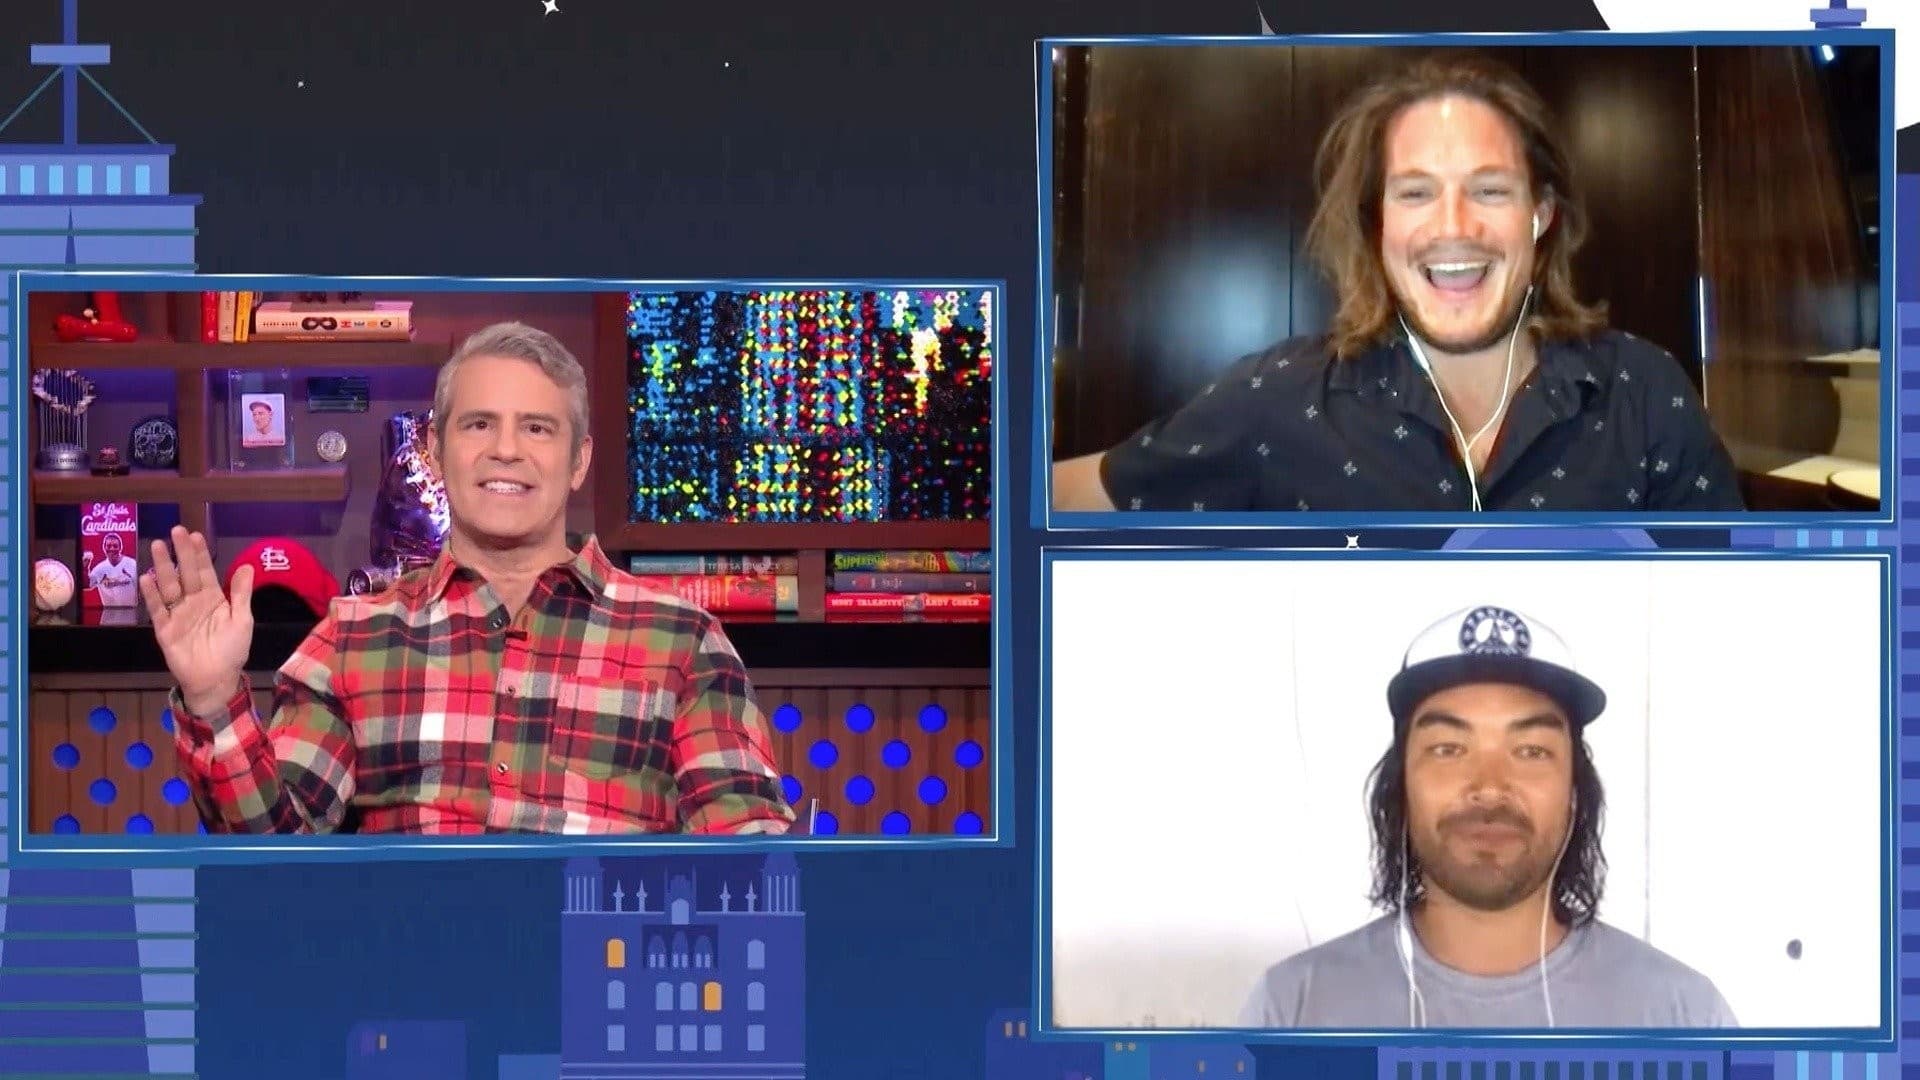 Watch What Happens Live with Andy Cohen Staffel 18 :Folge 51 